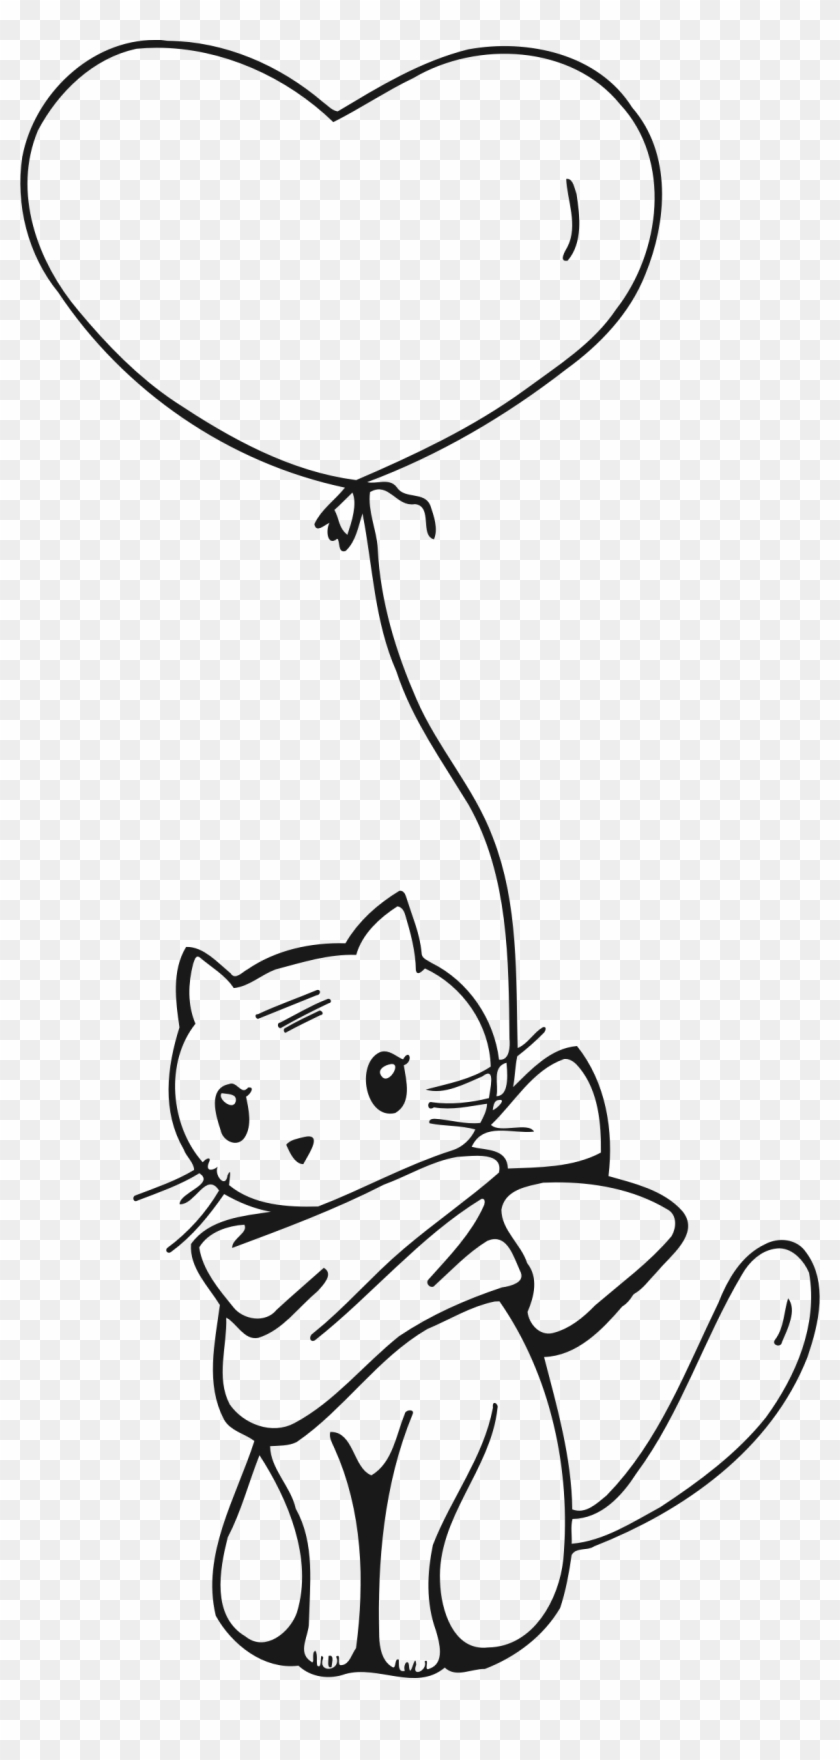 Cat And Balloon Picture Black And White - Outline Drawings Of Cats Clipart #1943384